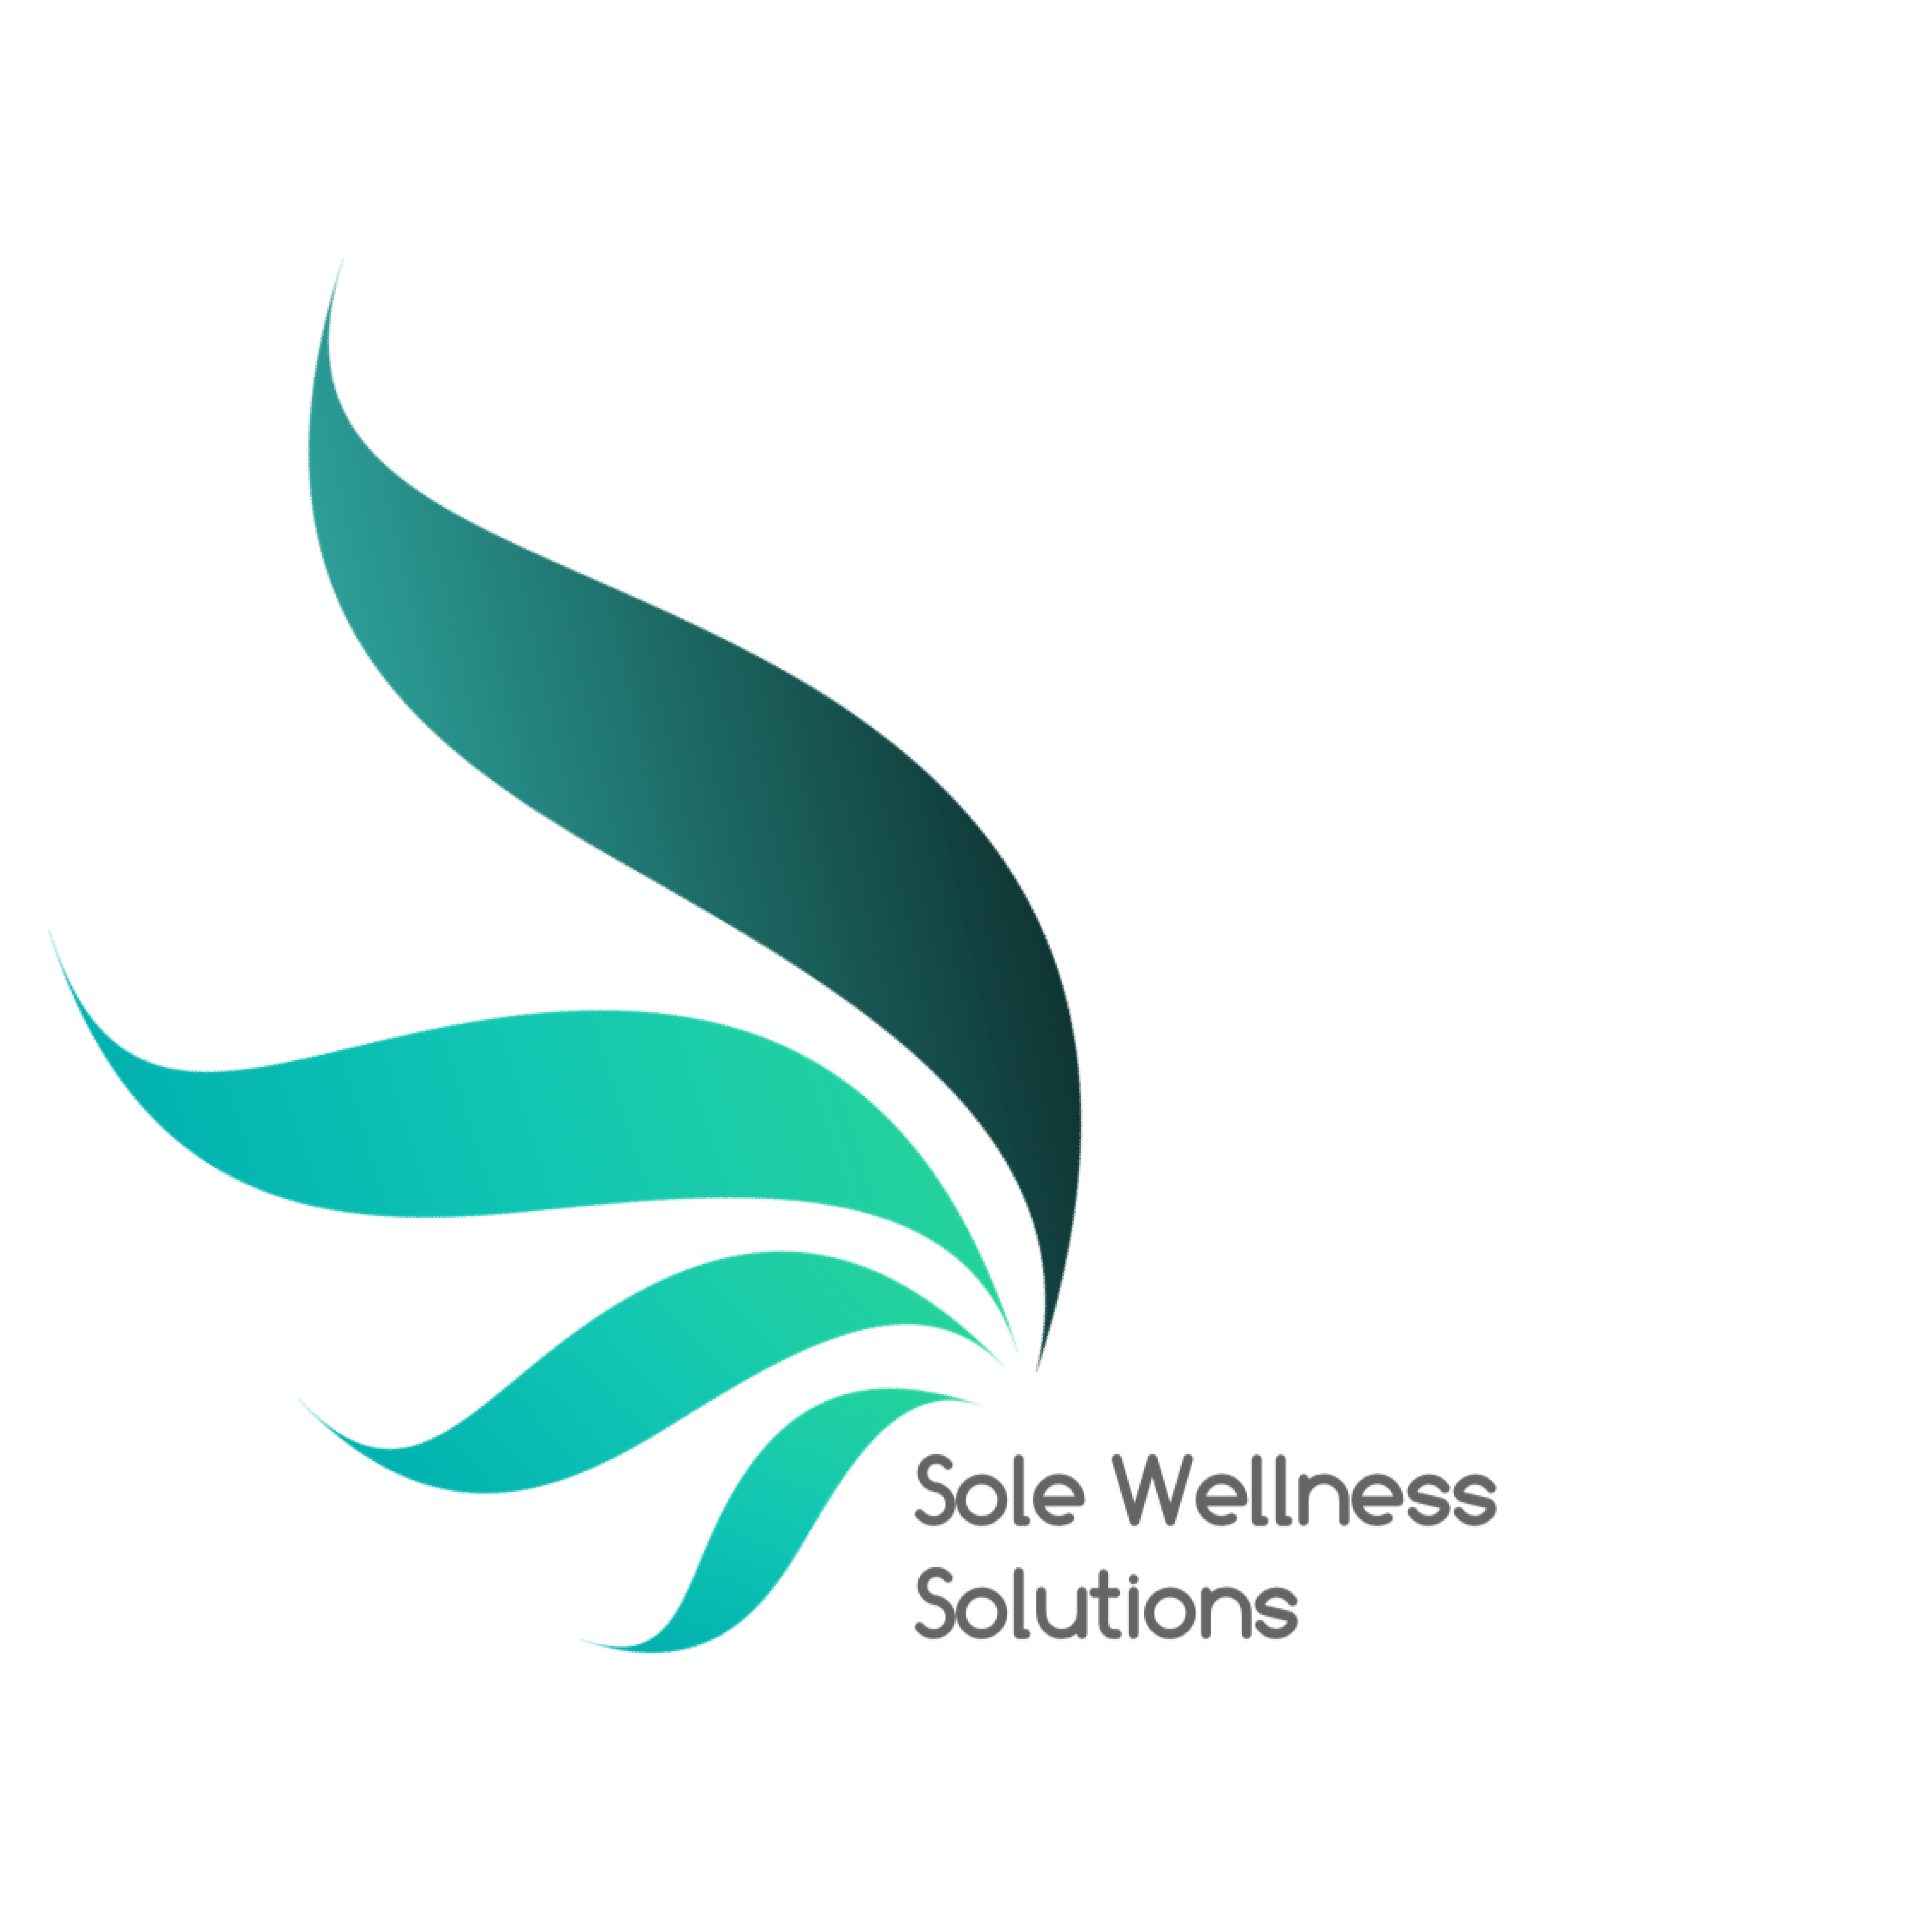 Sole Wellness Solutions